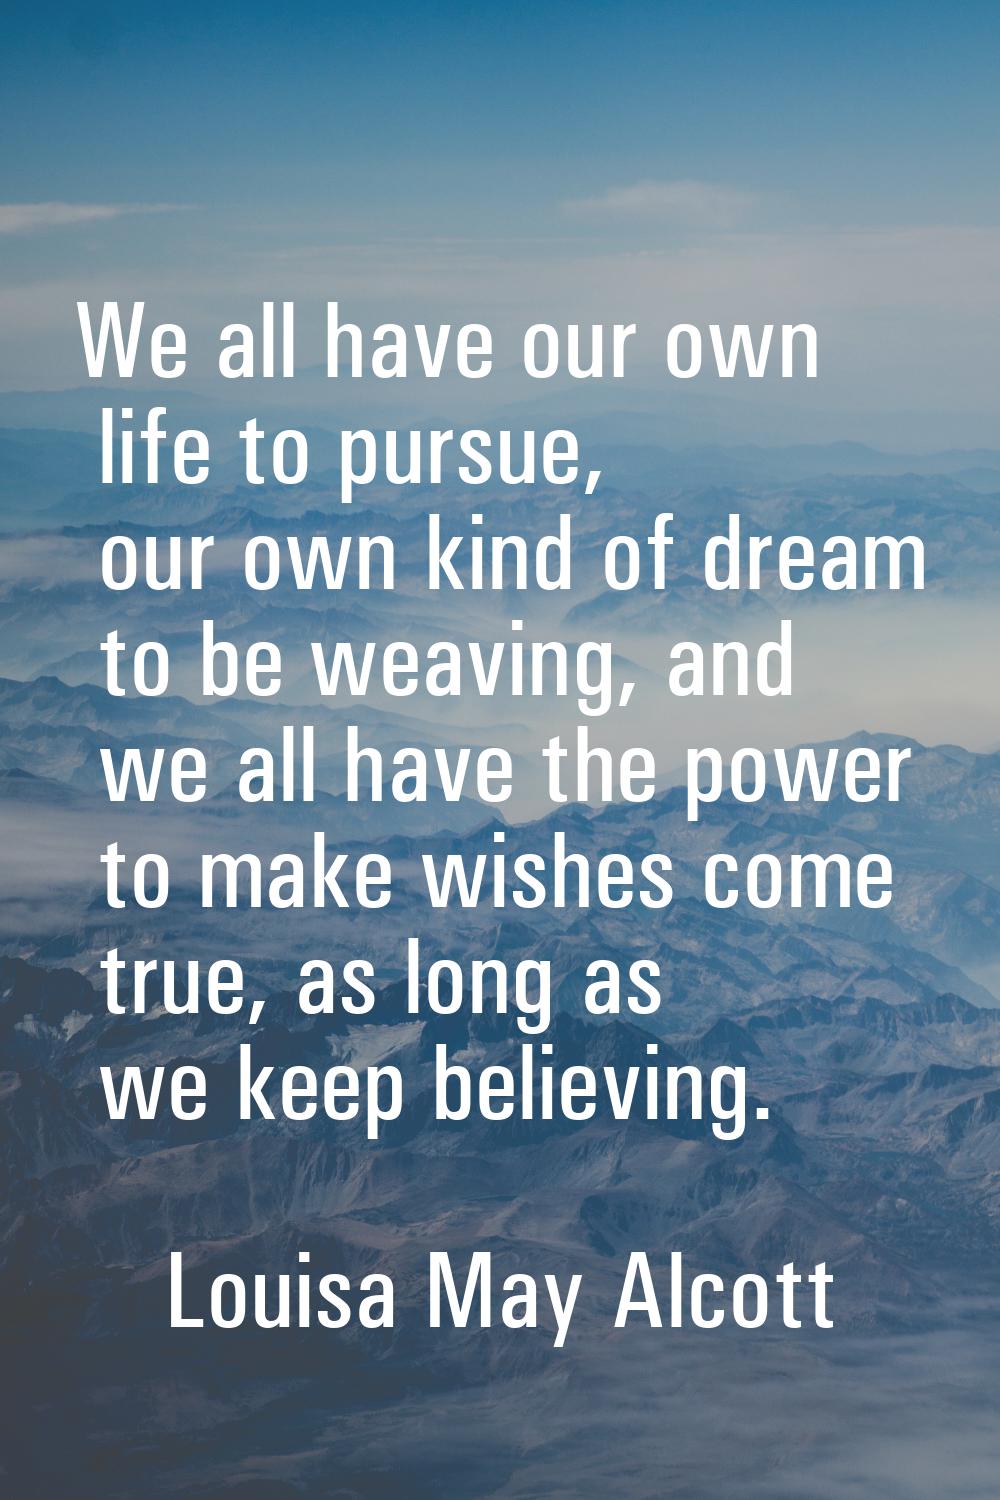 We all have our own life to pursue, our own kind of dream to be weaving, and we all have the power 